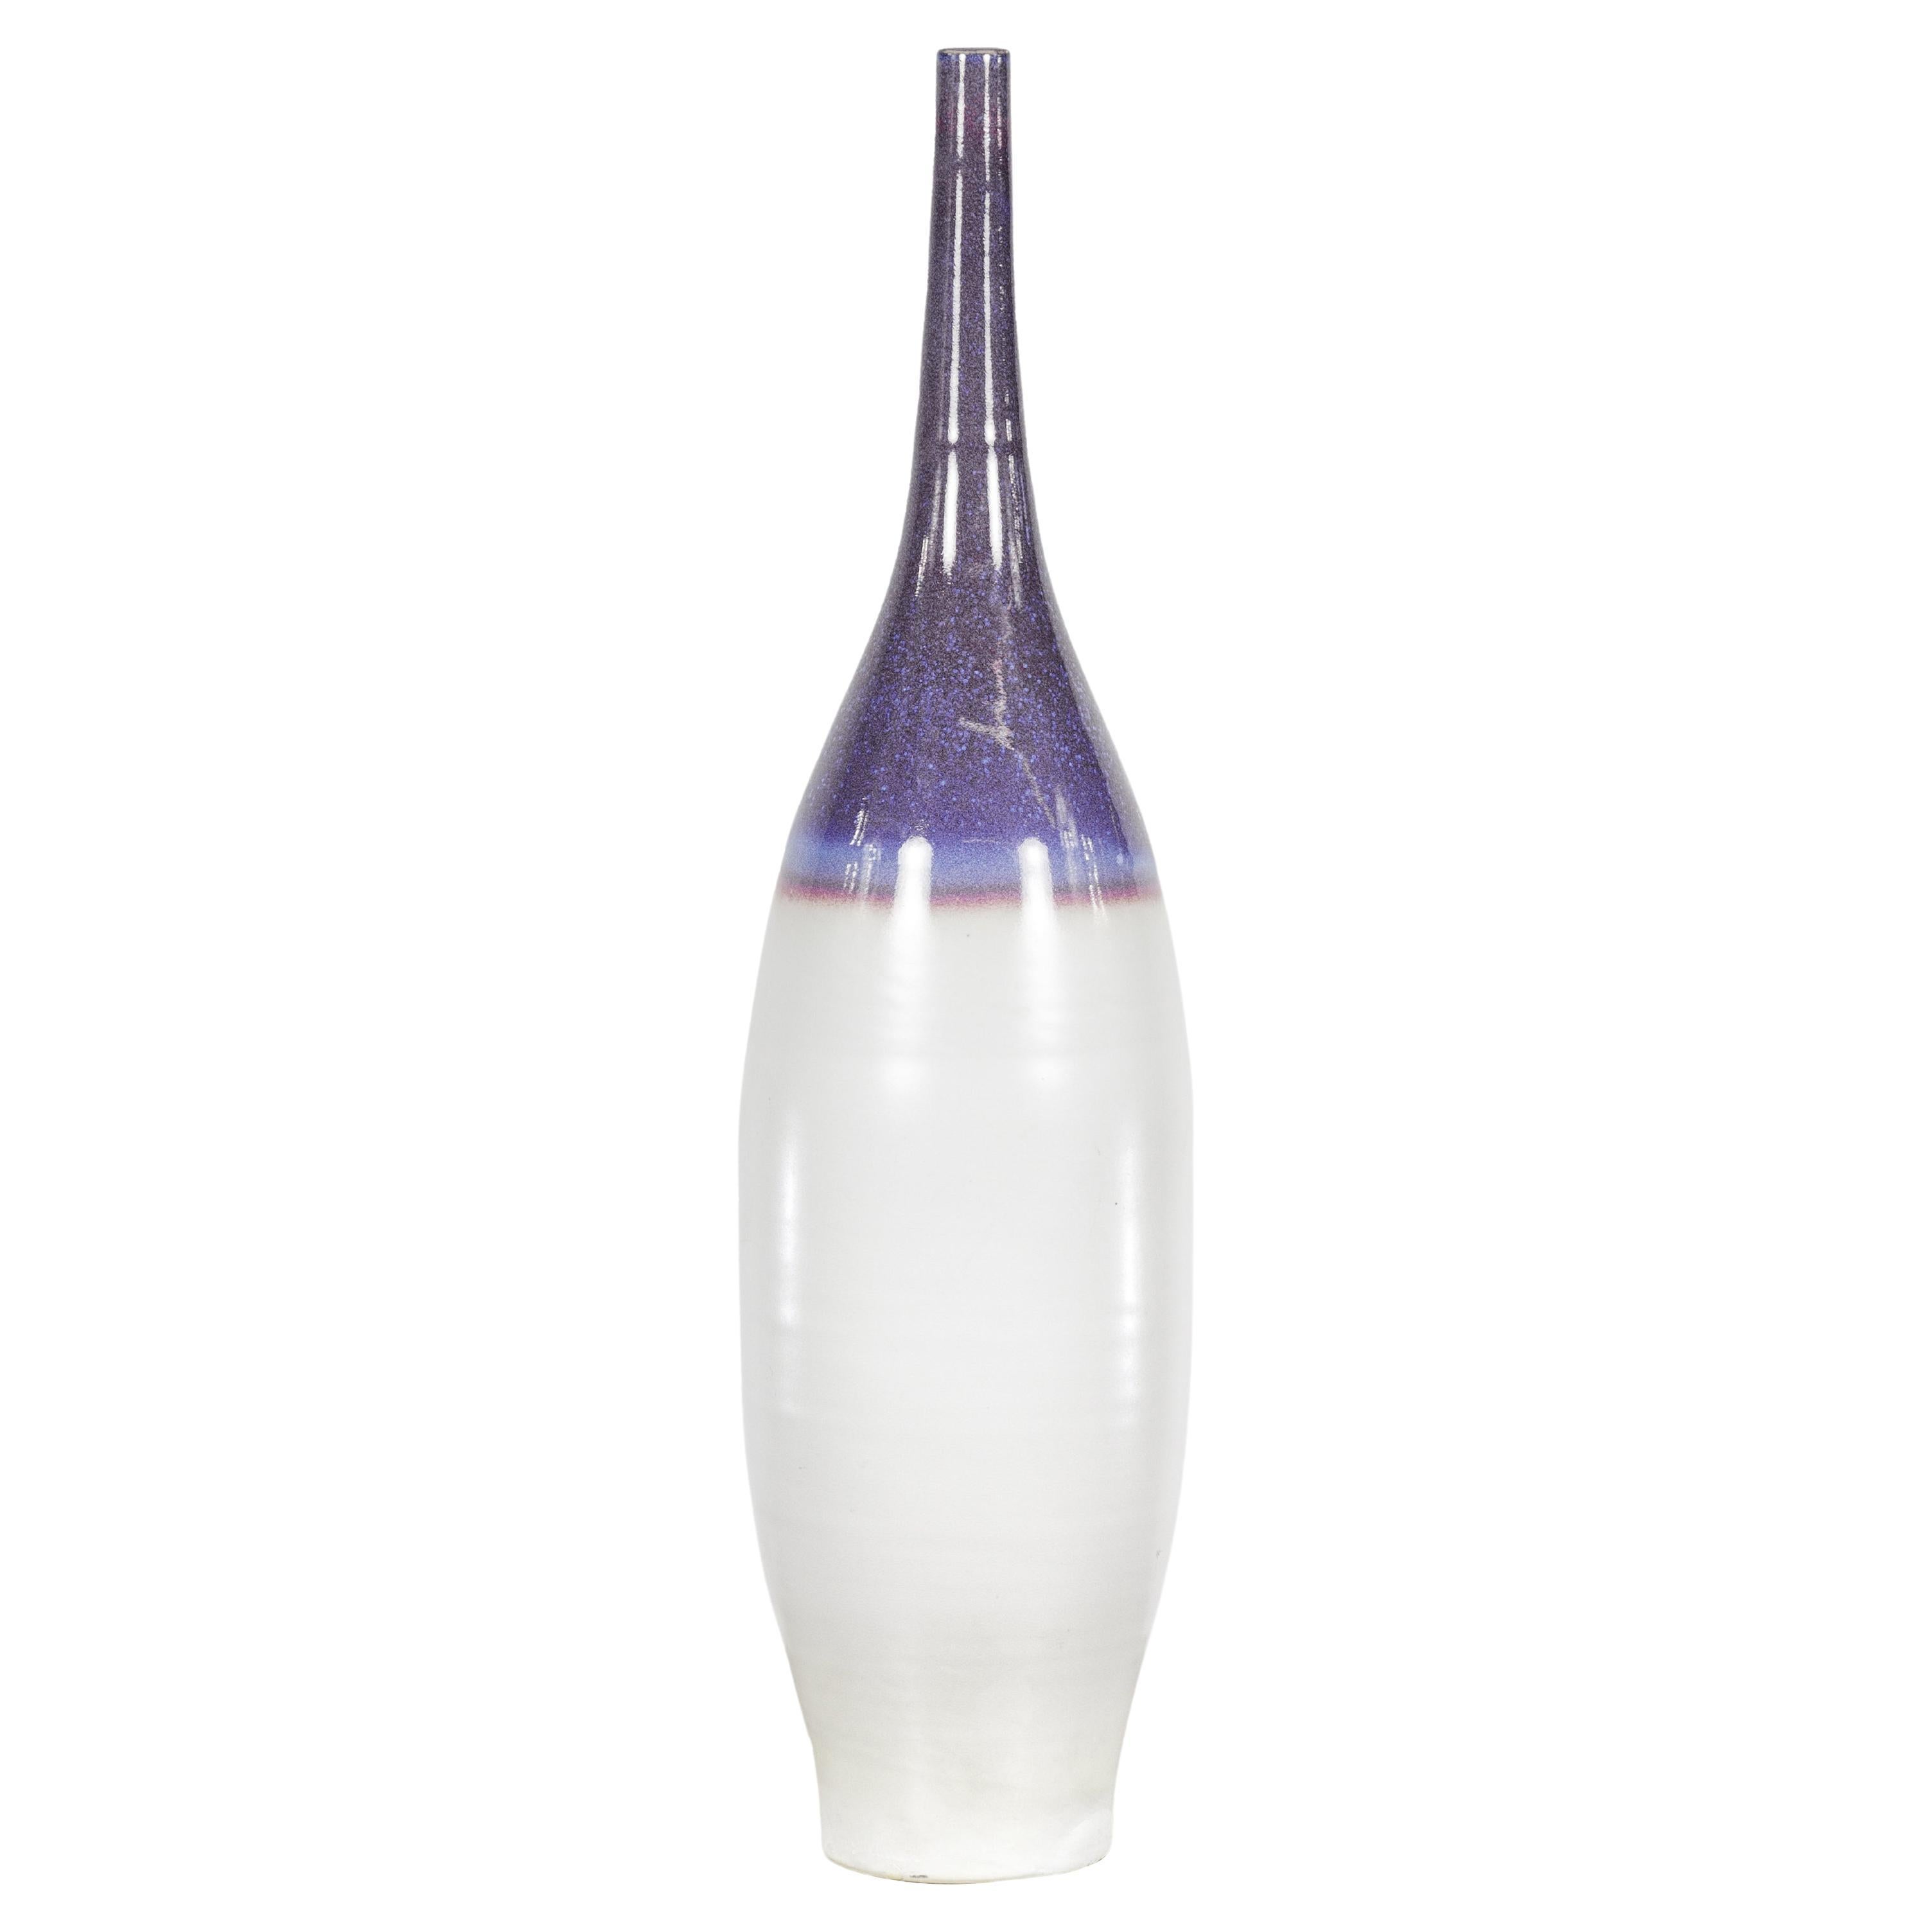 Multicolor Ceramic Bottle Base with Purple, Blue, Pink and White Tones